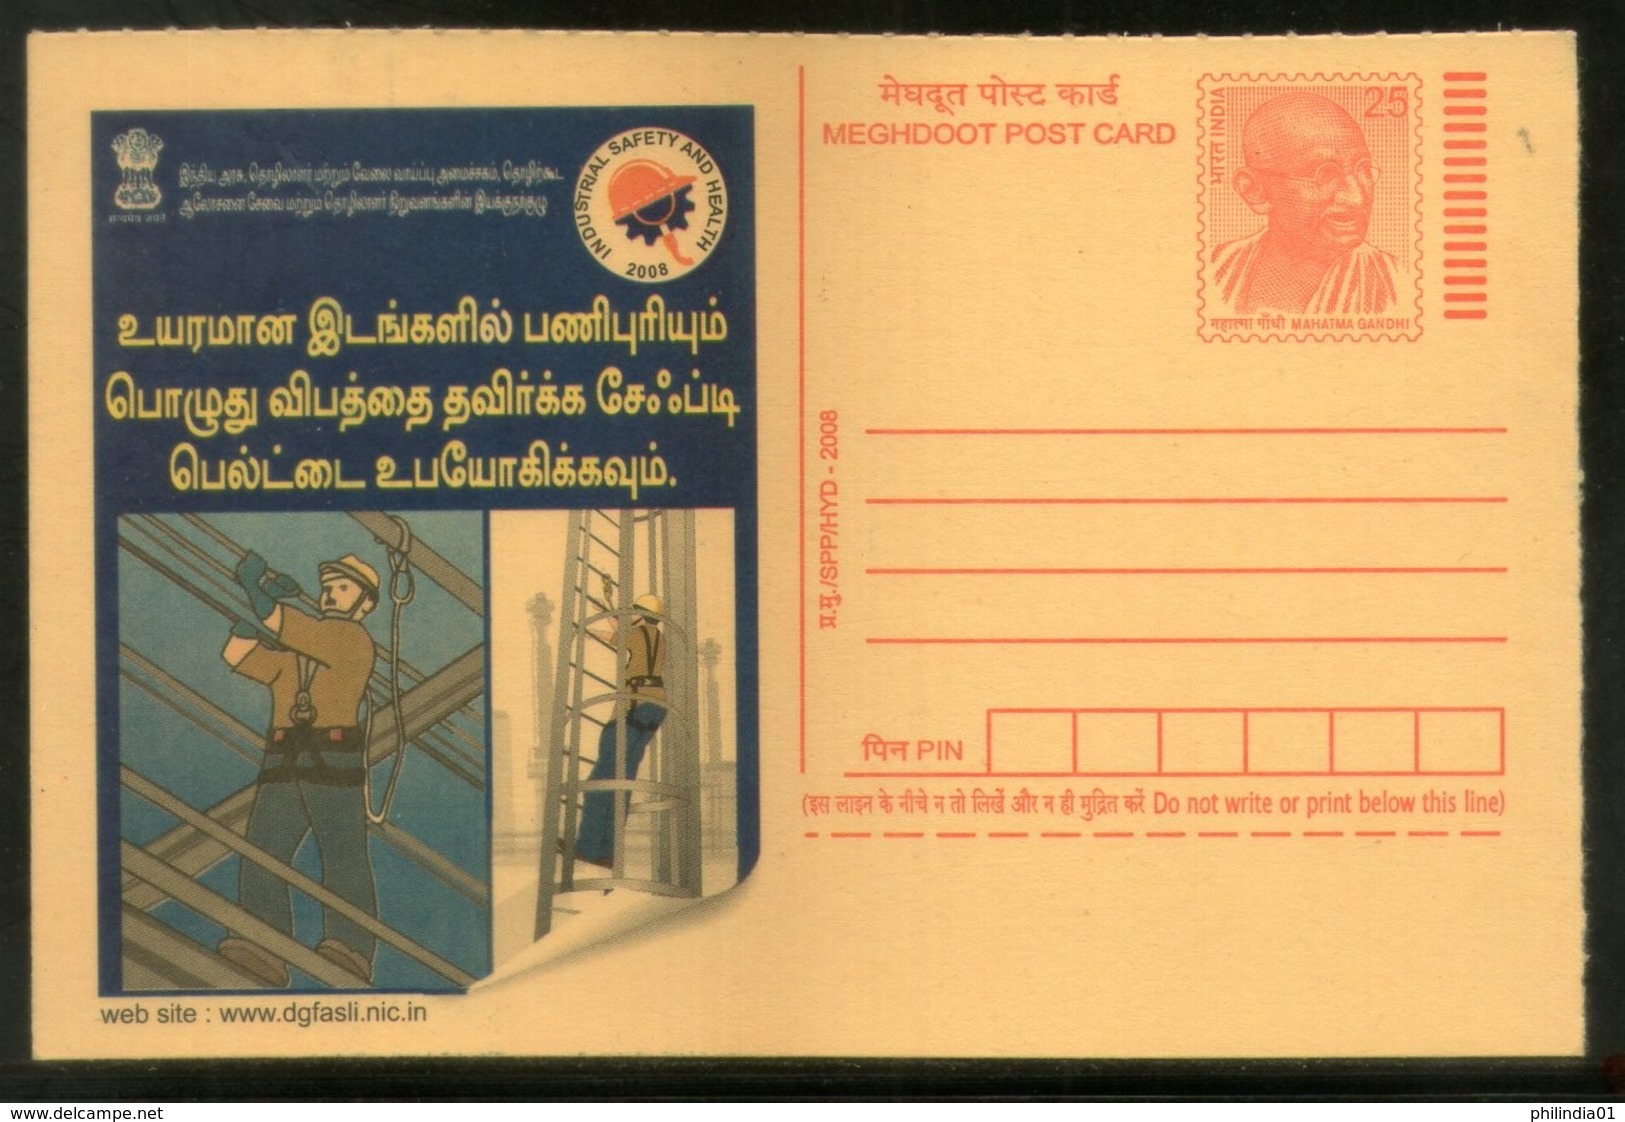 India 2008 "Use Safety Belts On High" Industrial Safety & Health Job Tamil Advert Gandhi Post Card # 504 - Accidentes Y Seguridad Vial